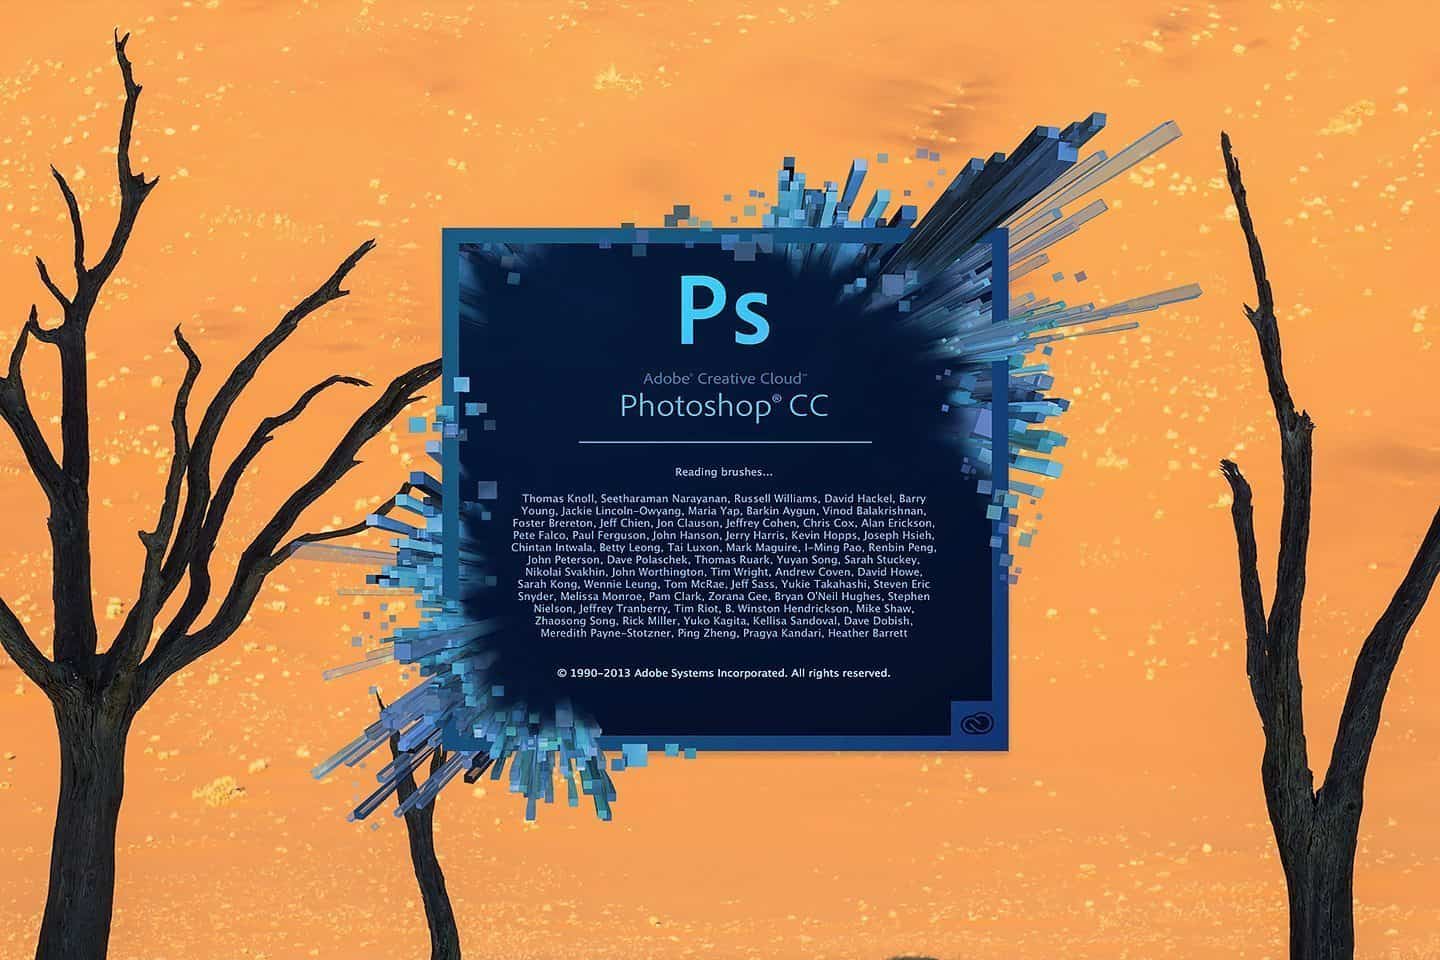 Why I’m Back in Love with Adobe and the Creative Cloud!